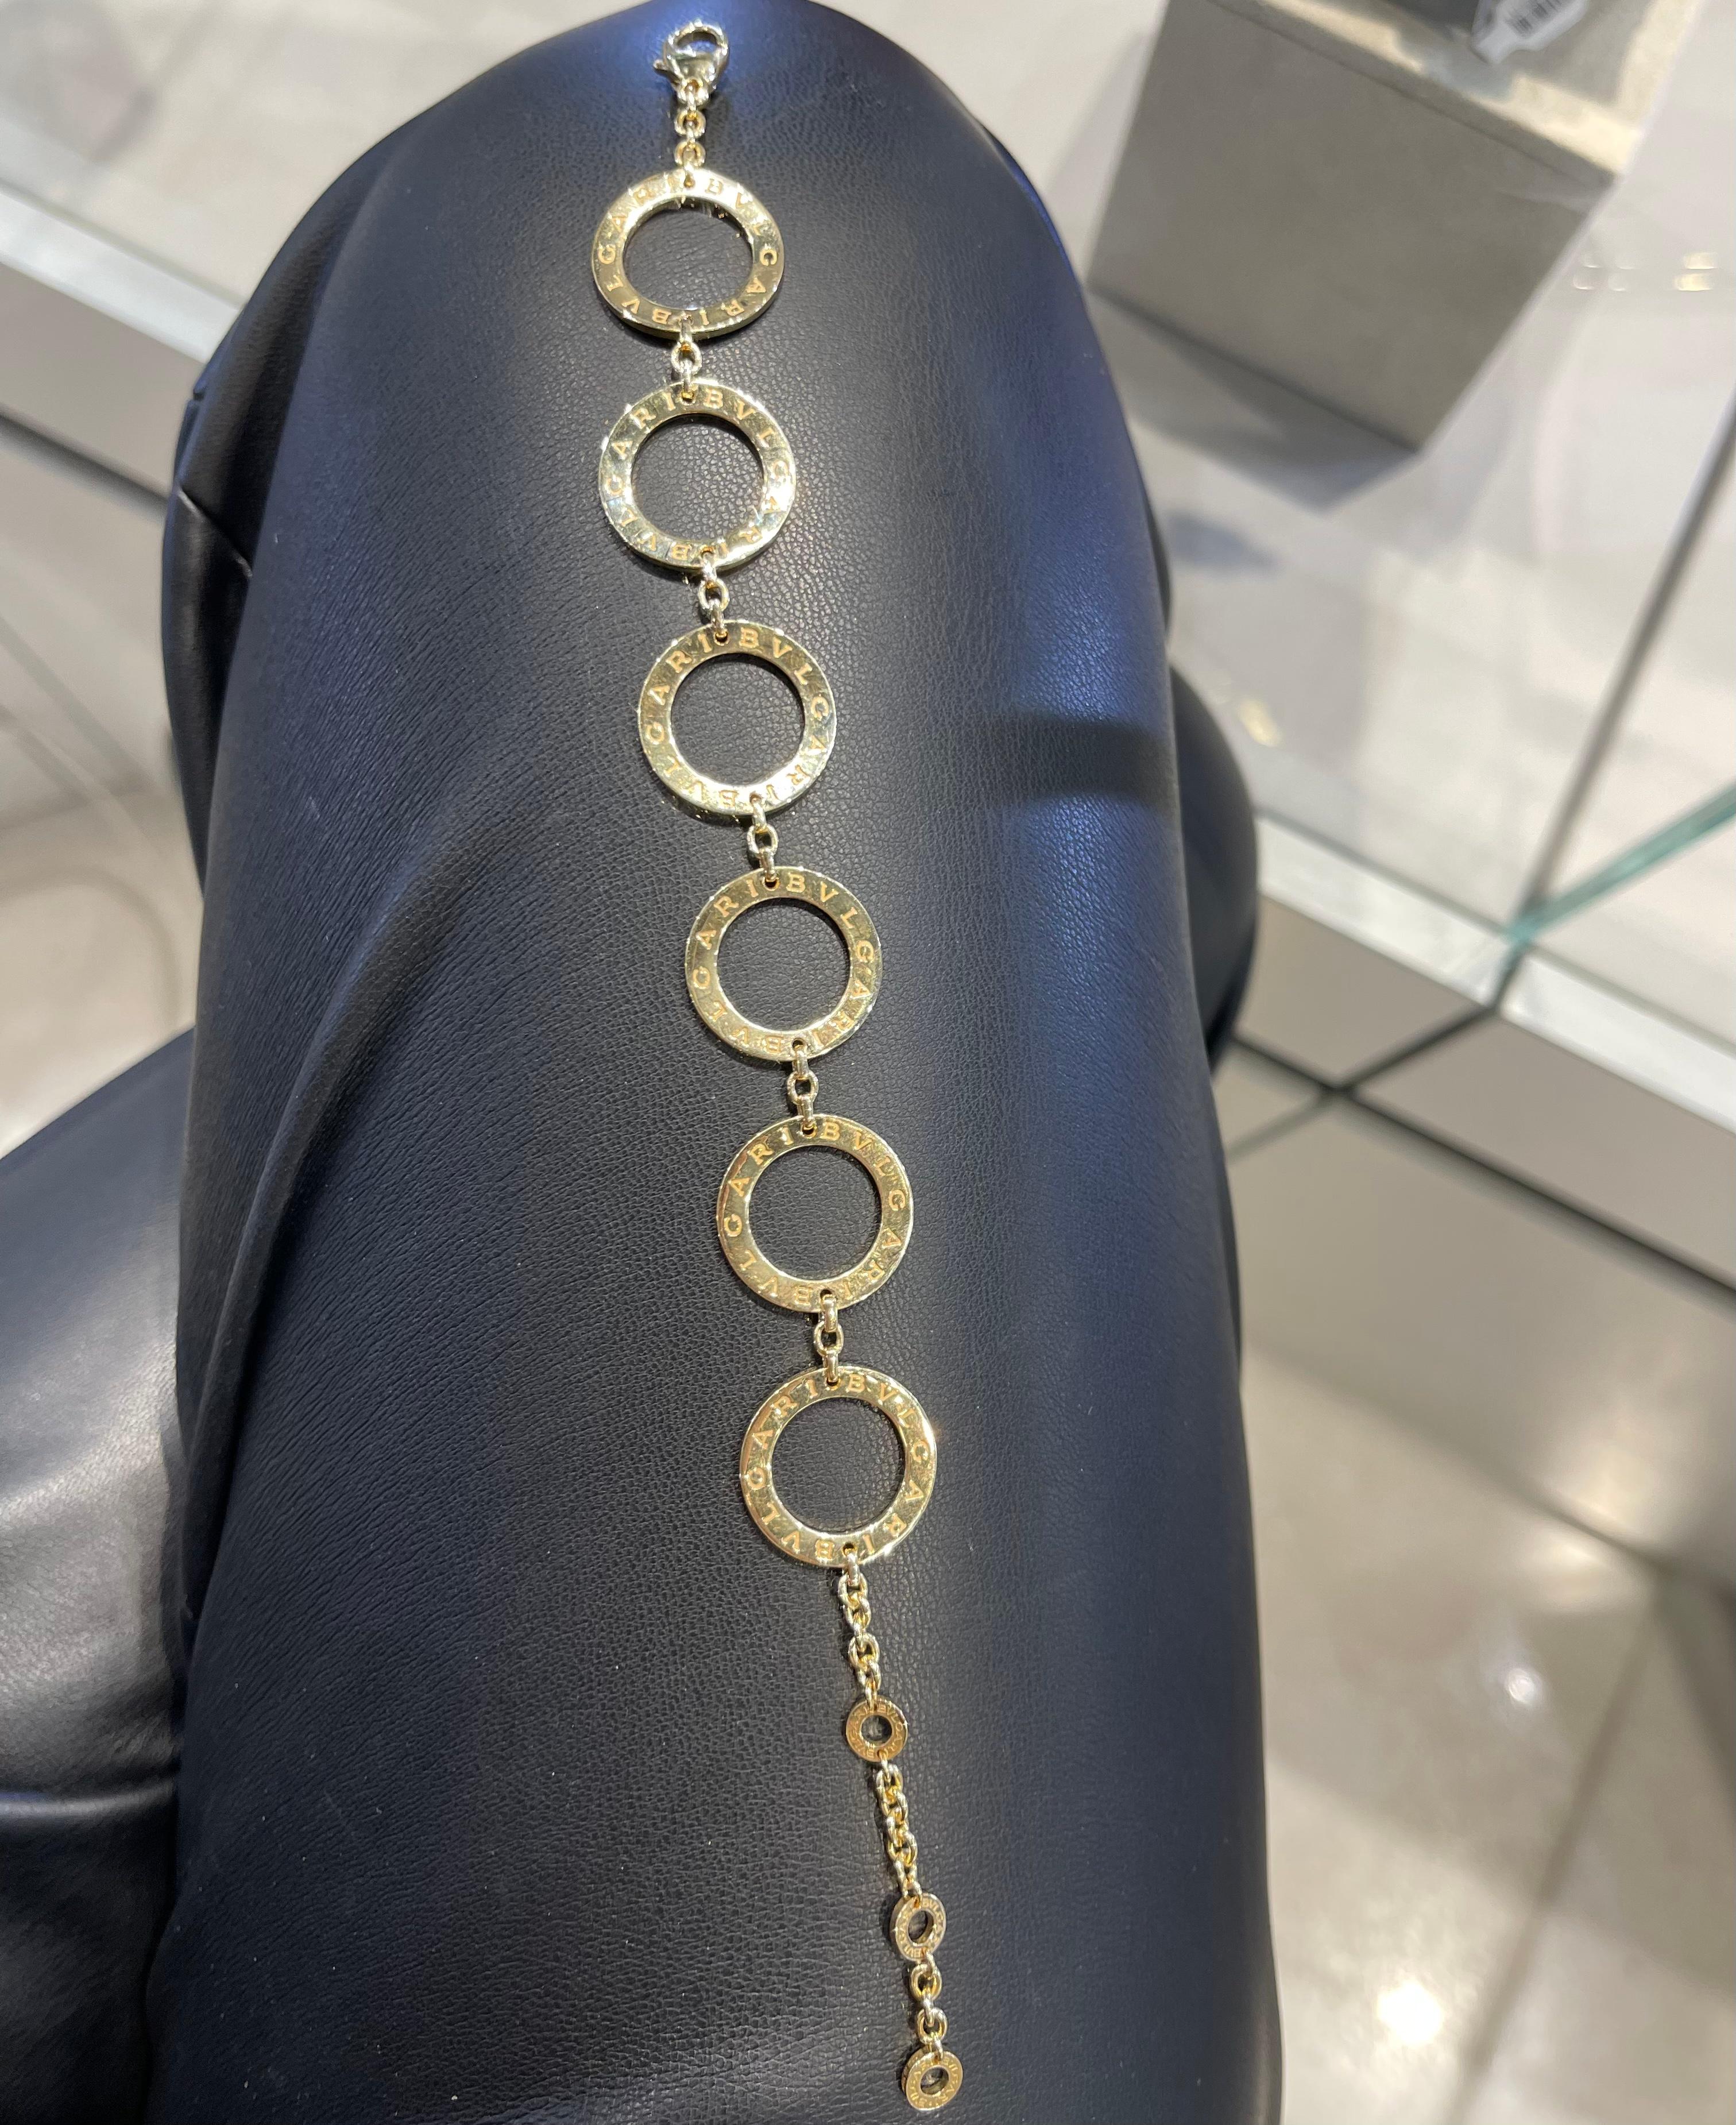 Bvlgari Signature 6 Circle Bracelet in 18k Yellow Gold In Excellent Condition For Sale In Miami, FL